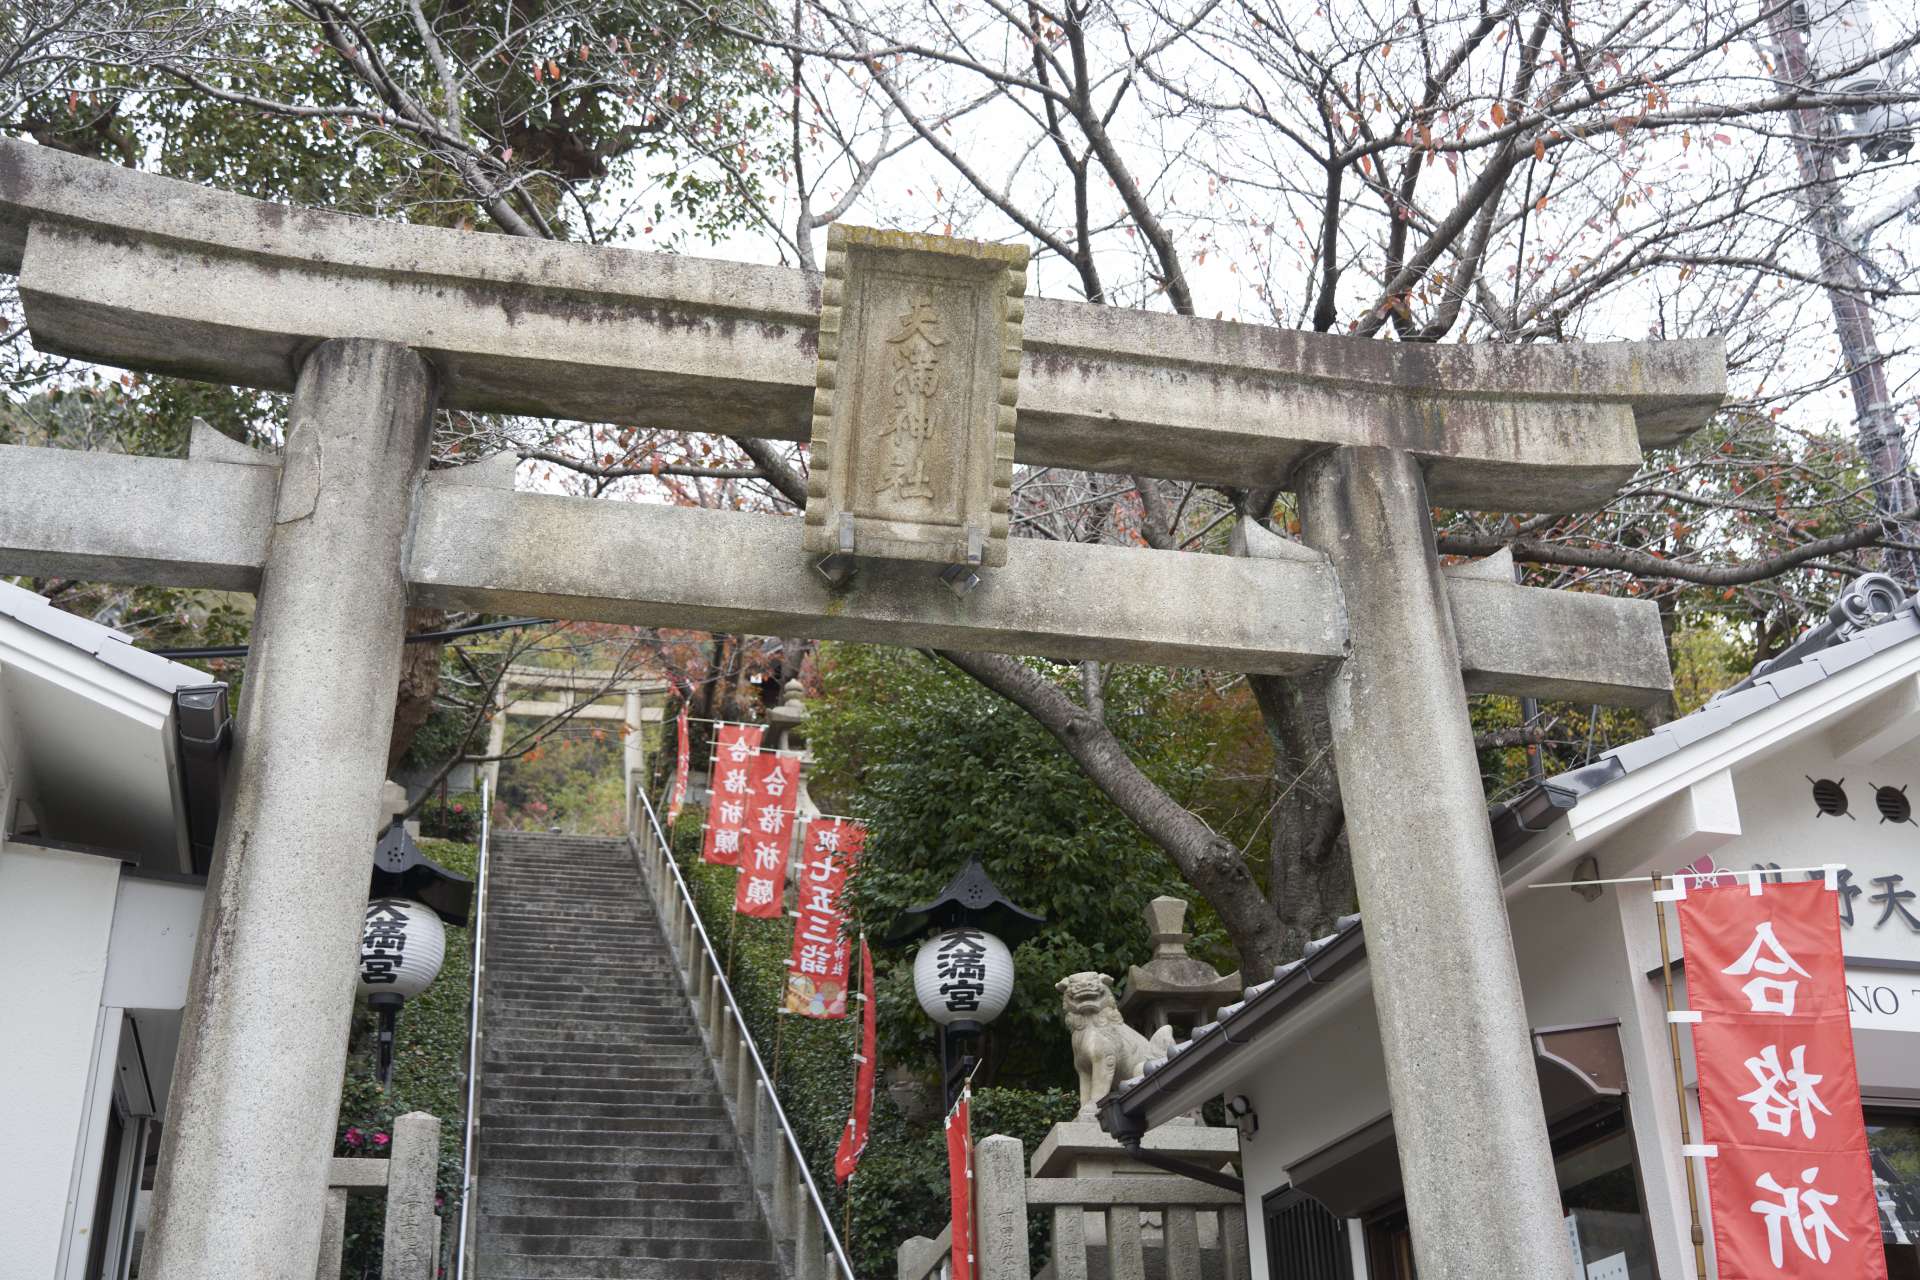 Taira no Kiyomori established this shrine over 840 years ago. It watches over Kobe from a plateau above the city.